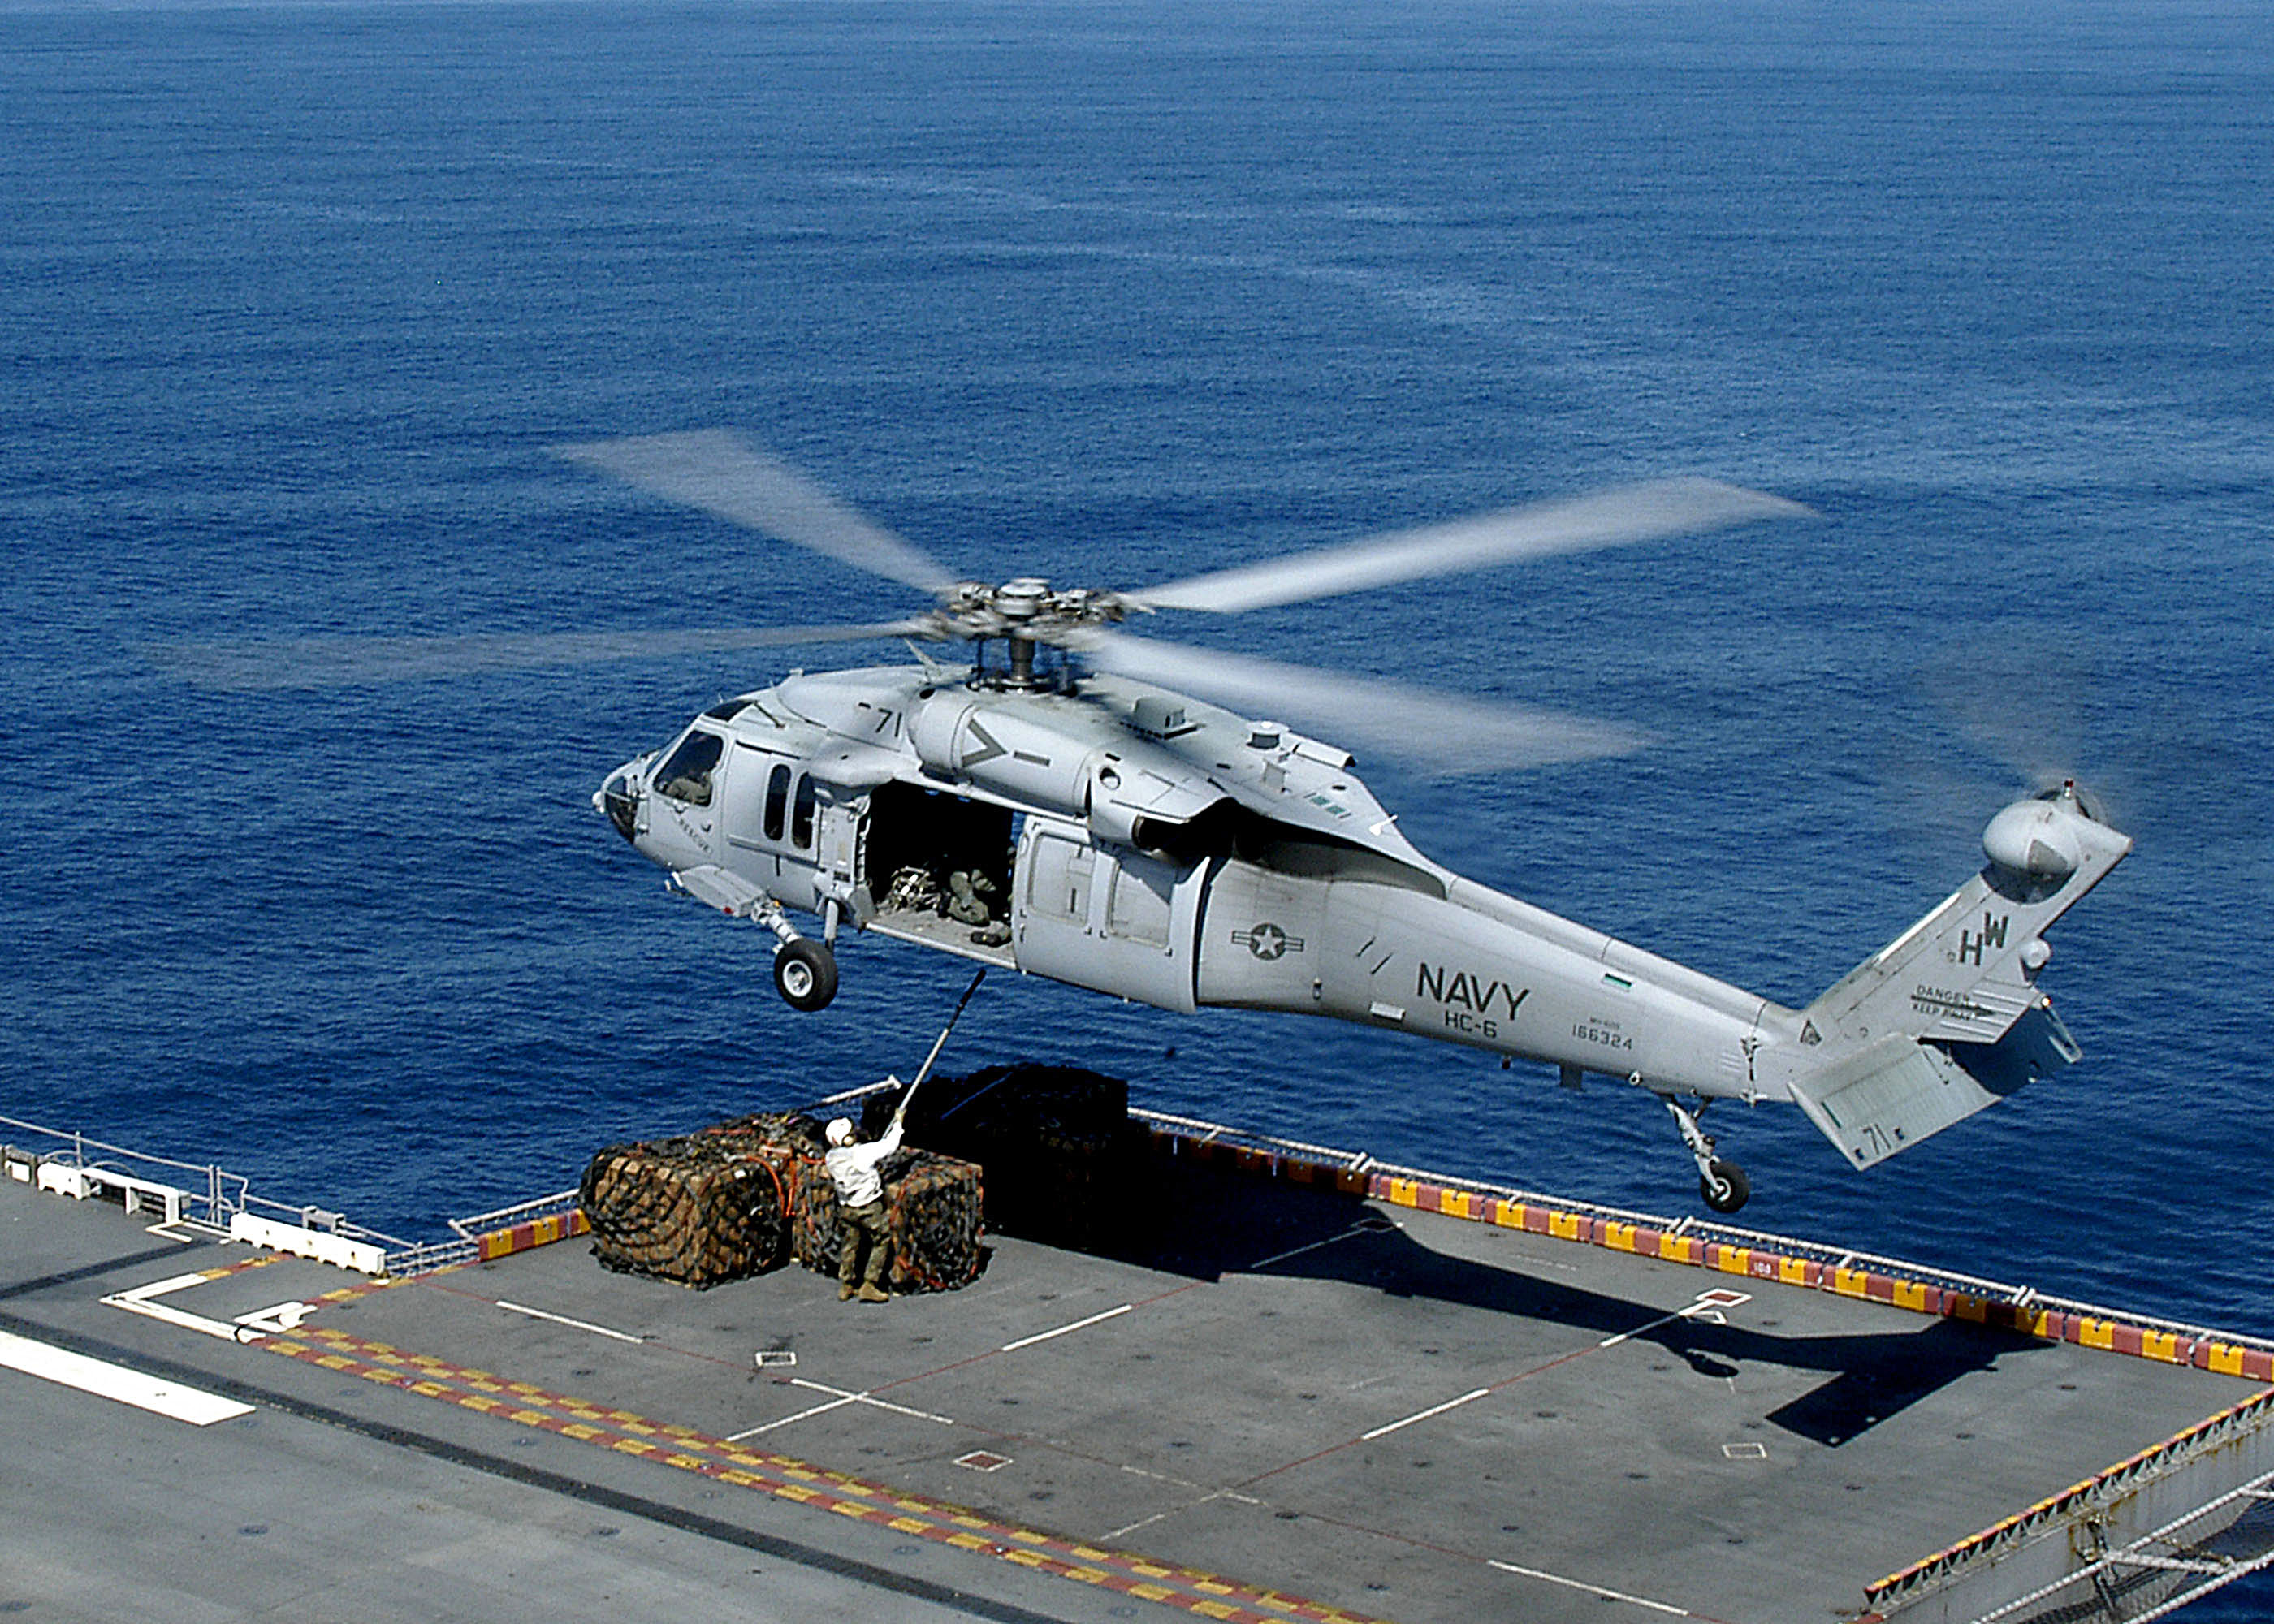 US Navy 050204-N-0050M-001 An MH-60S Knighthawk hovers above the flight deck of the amphibious assault ship USS Saipan (LHA 2)